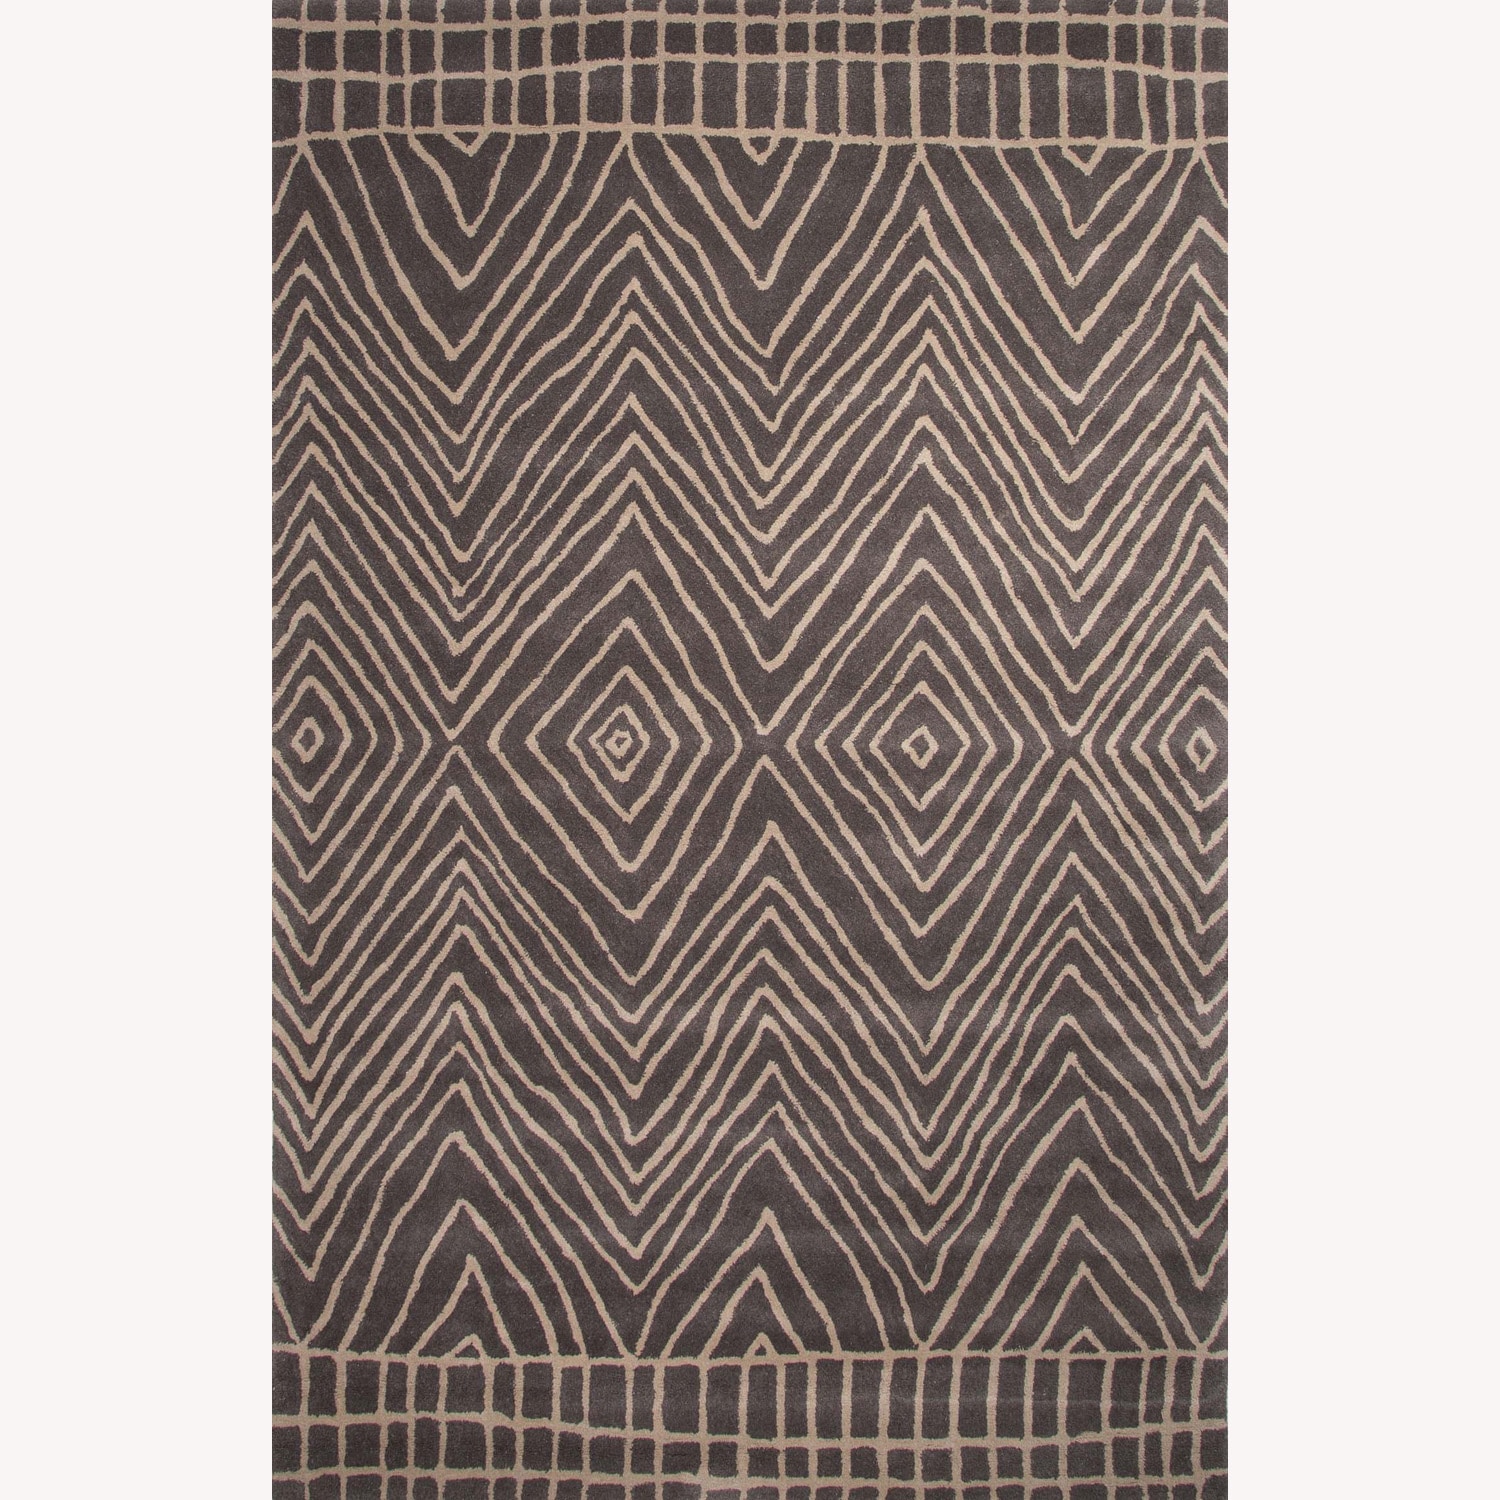 Hand tufted Abstract Pattern Gray/black Wool Rug (8x10)